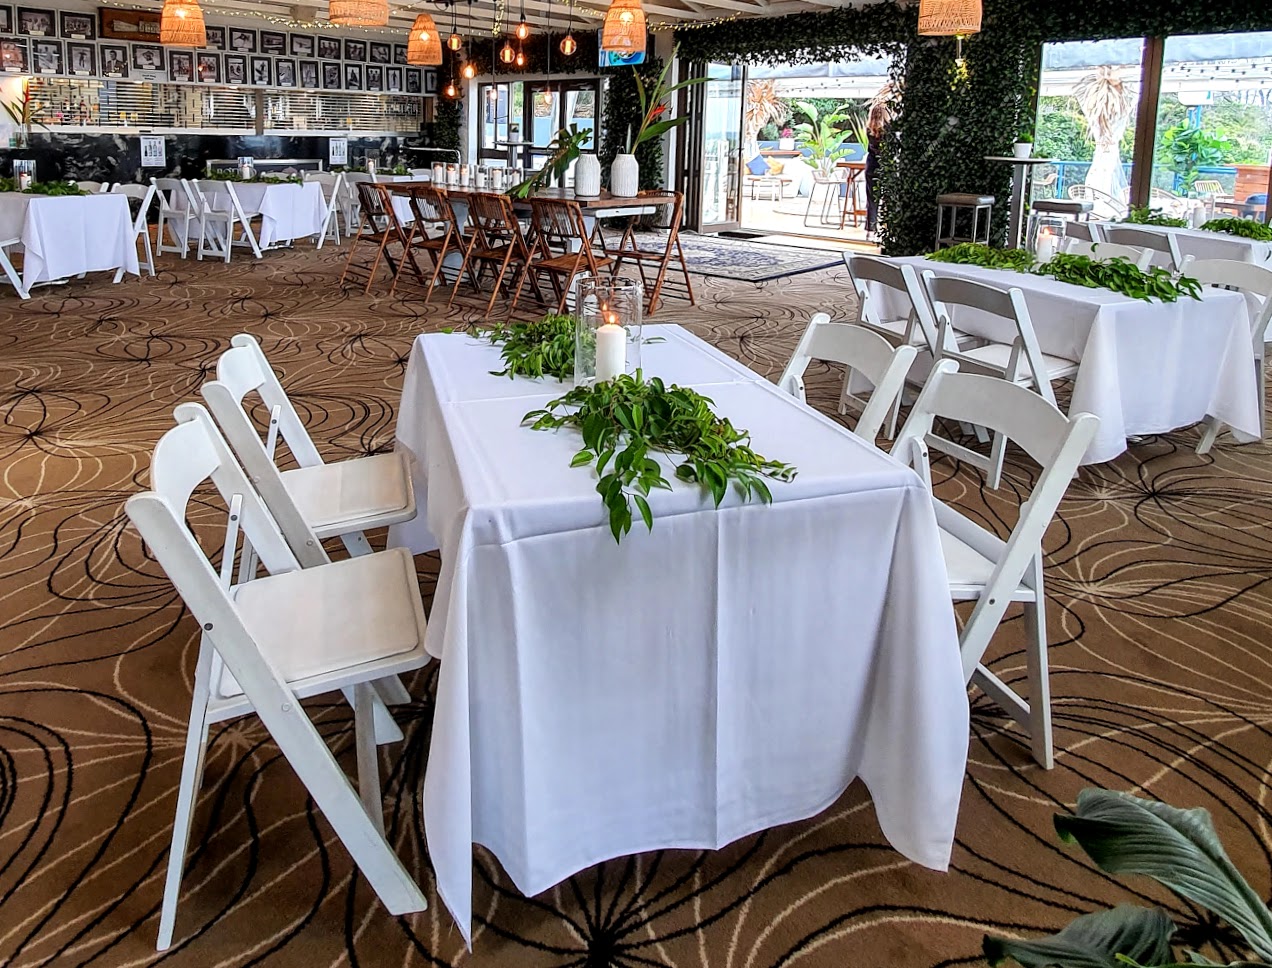 Cocktail style wedding reception backdrop greenery door framing, 6 x mall venue tables, Malibu chairs